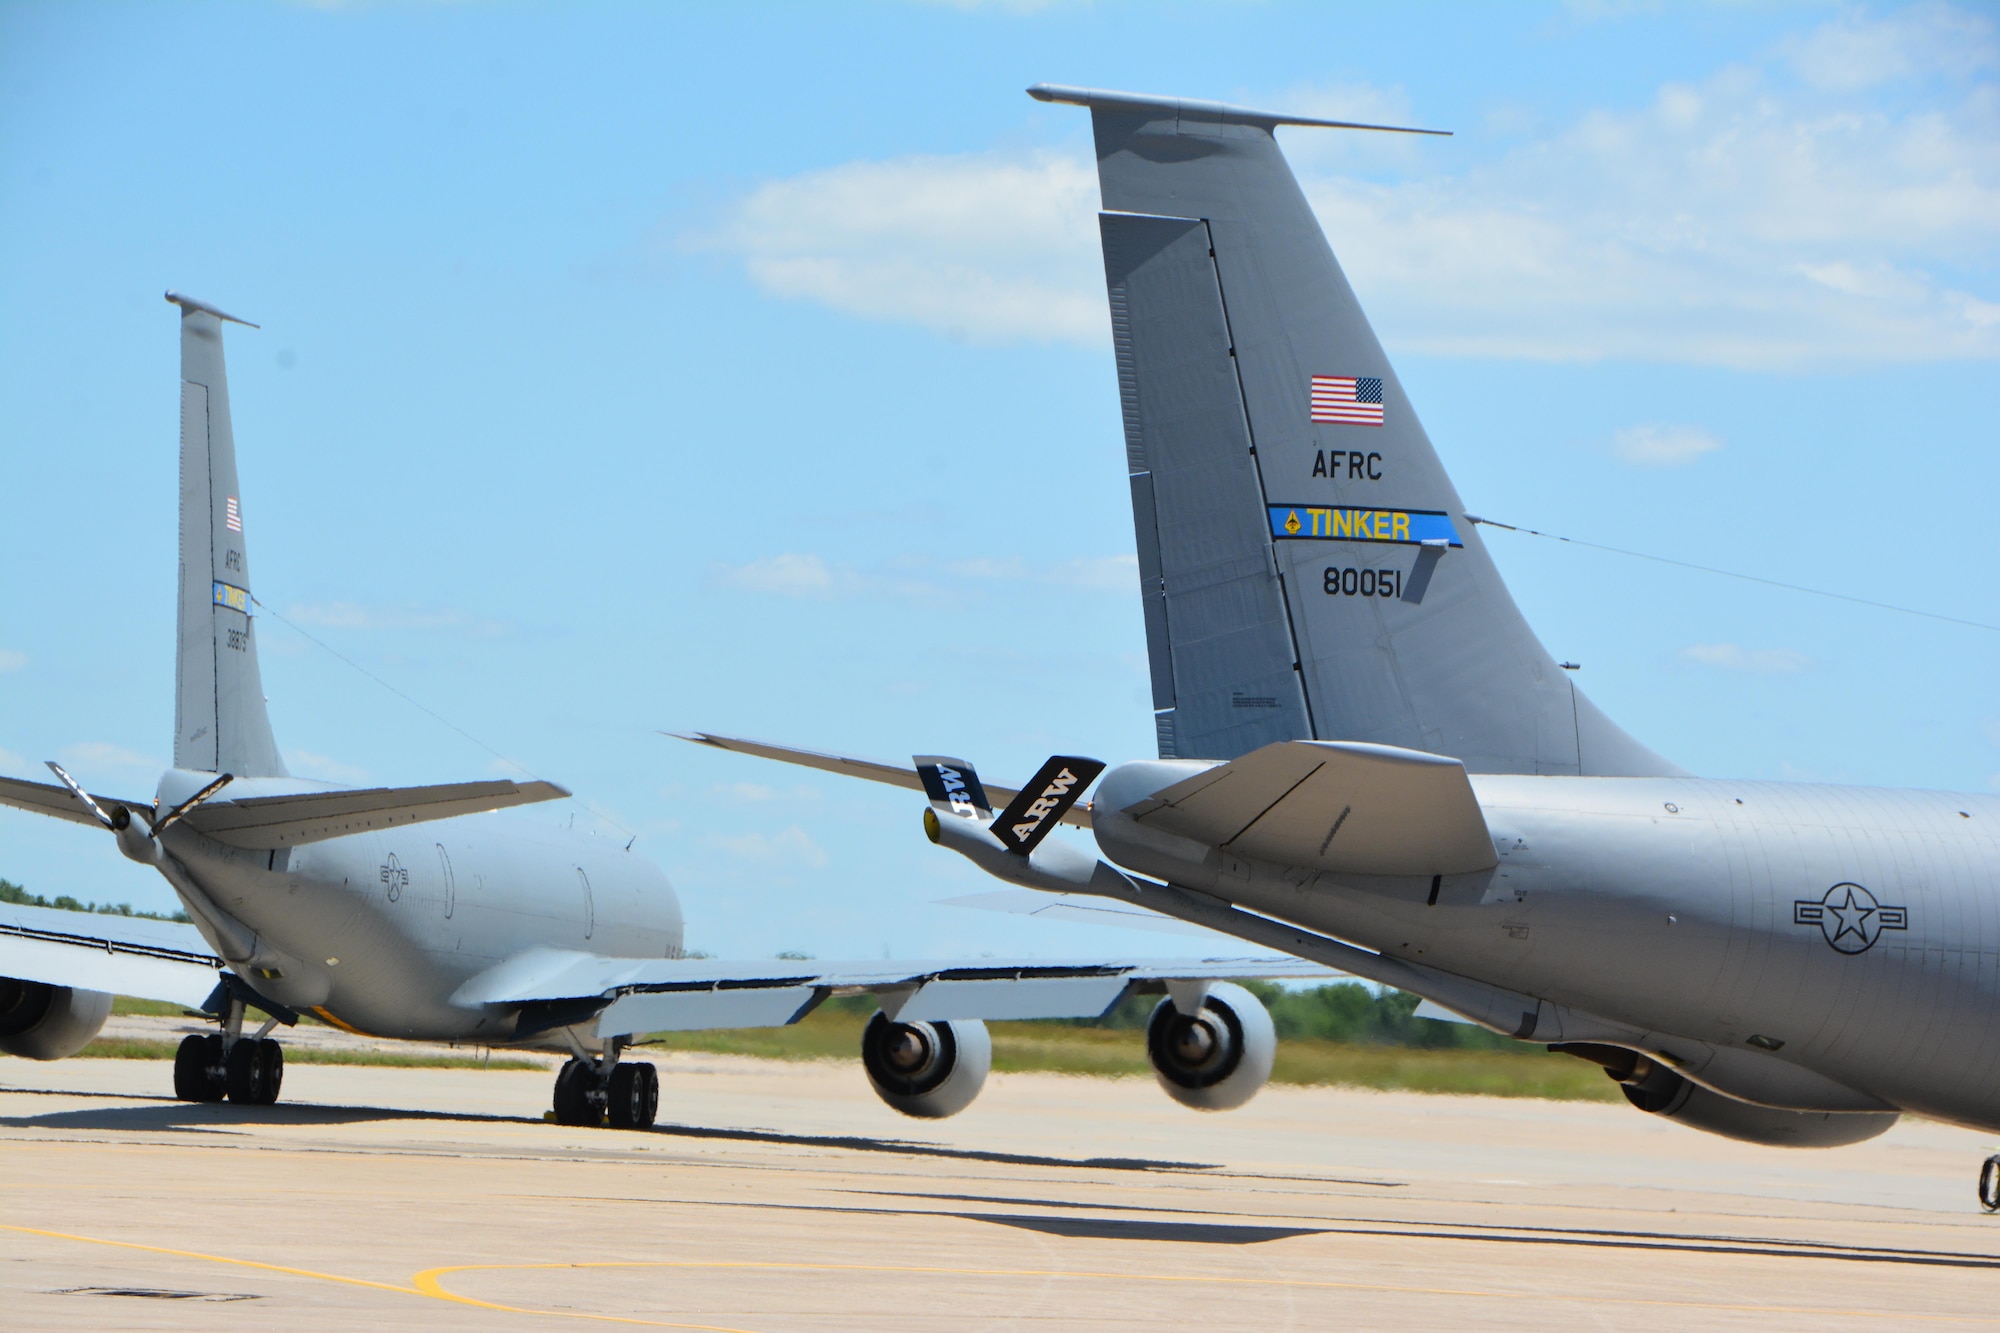 Two 507th Air Refueling Wing KC-135 Stratotanker alert aircraft taxi from one ramp to another to accommodate for shifting winds during the June Operational Exercise 16 at Tinker Air Force Base, Okla. JOE 16 areas of inspection included maintaining aircraft, securing critical assets, processing personnel and cargo, responding to and launching alert aircraft, running command post operations, and many other critical tasks. (U.S. Air Force Photo/Maj. Jon Quinlan)